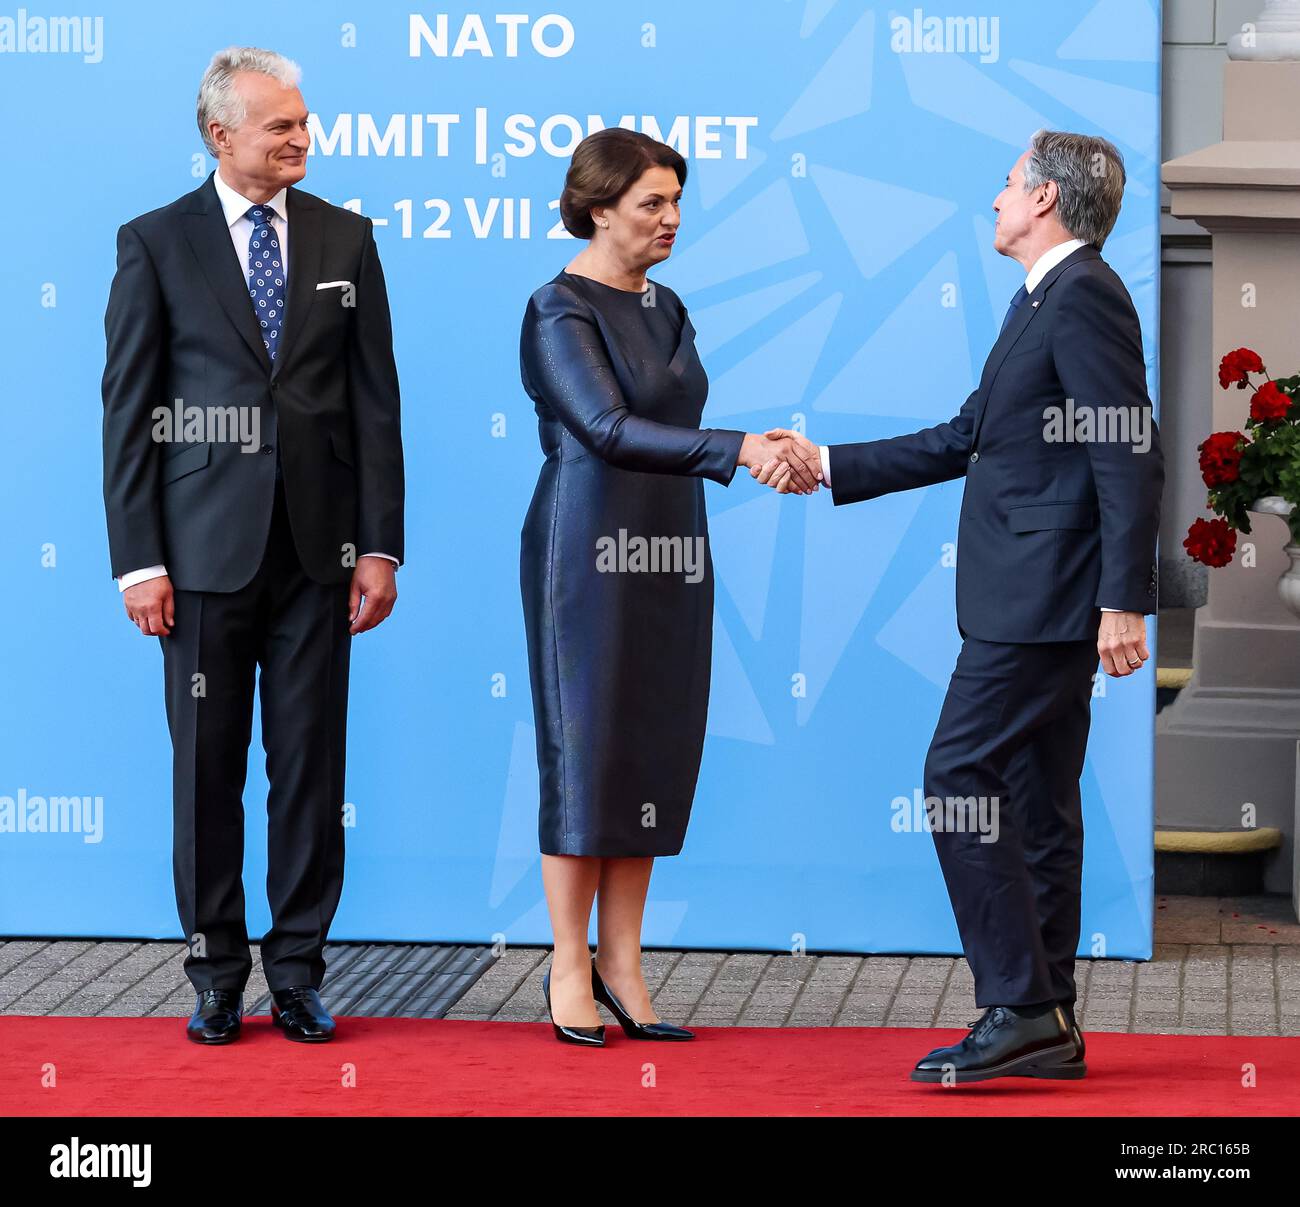 Vilnius, Lithuania. 11th July, 2023. President of Lithuania, Gitanas Naus?da and his wife Diana Naus?dien? wellcome United States Secretary of State, Antony Blinken as he arrives for a social dinner during the high level NATO summit in Vilnius, Lithuania on July 11, 2023. The President of Lithuania hosts the dinner for world leaders in the Presidential Palace. The summit agenda covers Ukraine's bid to join the organisation, the accession process of Sweden, boosting arms stockpiles and reviewing defence plans. (Photo by Dominika Zarzycka/Sipa USA) Credit: Sipa USA/Alamy Live News Stock Photo